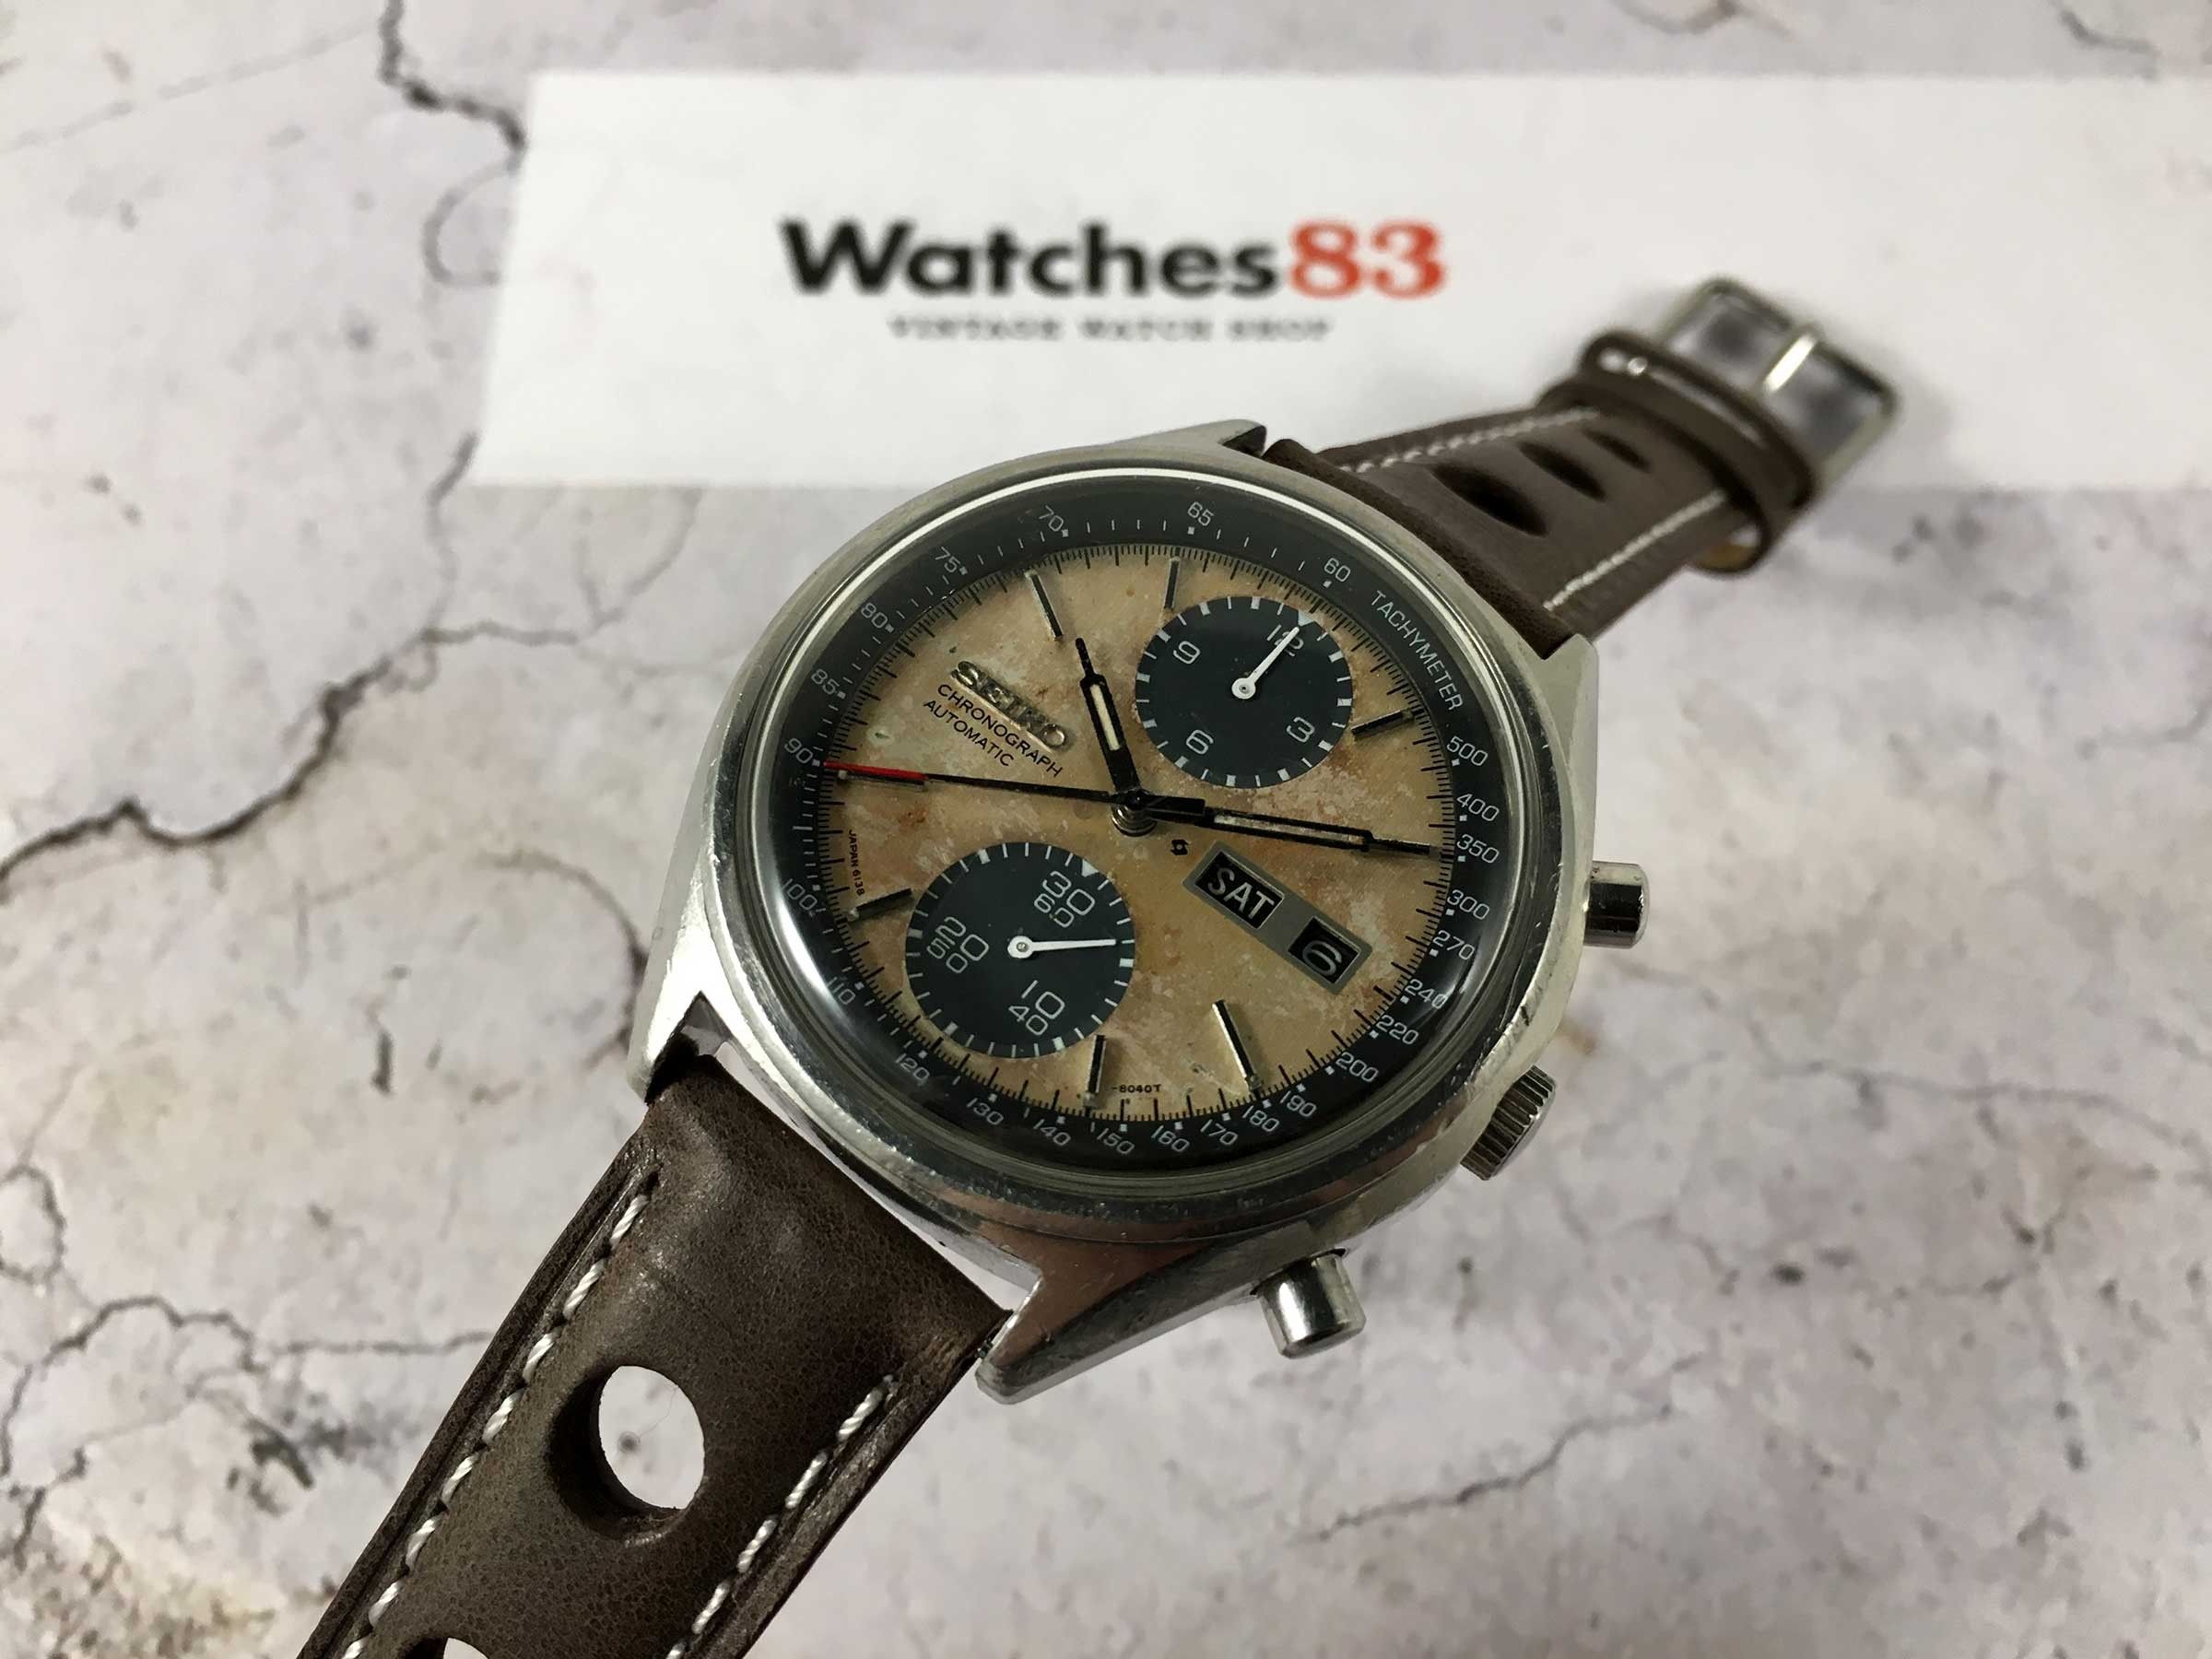 SEIKO PANDA Vintage automatic chronograph watch Ref. 6138-8020 Cal. 6138-B  SPECTACULAR PATINA *** TROPIC DIAL *** Seiko Vintage watches - Watches83